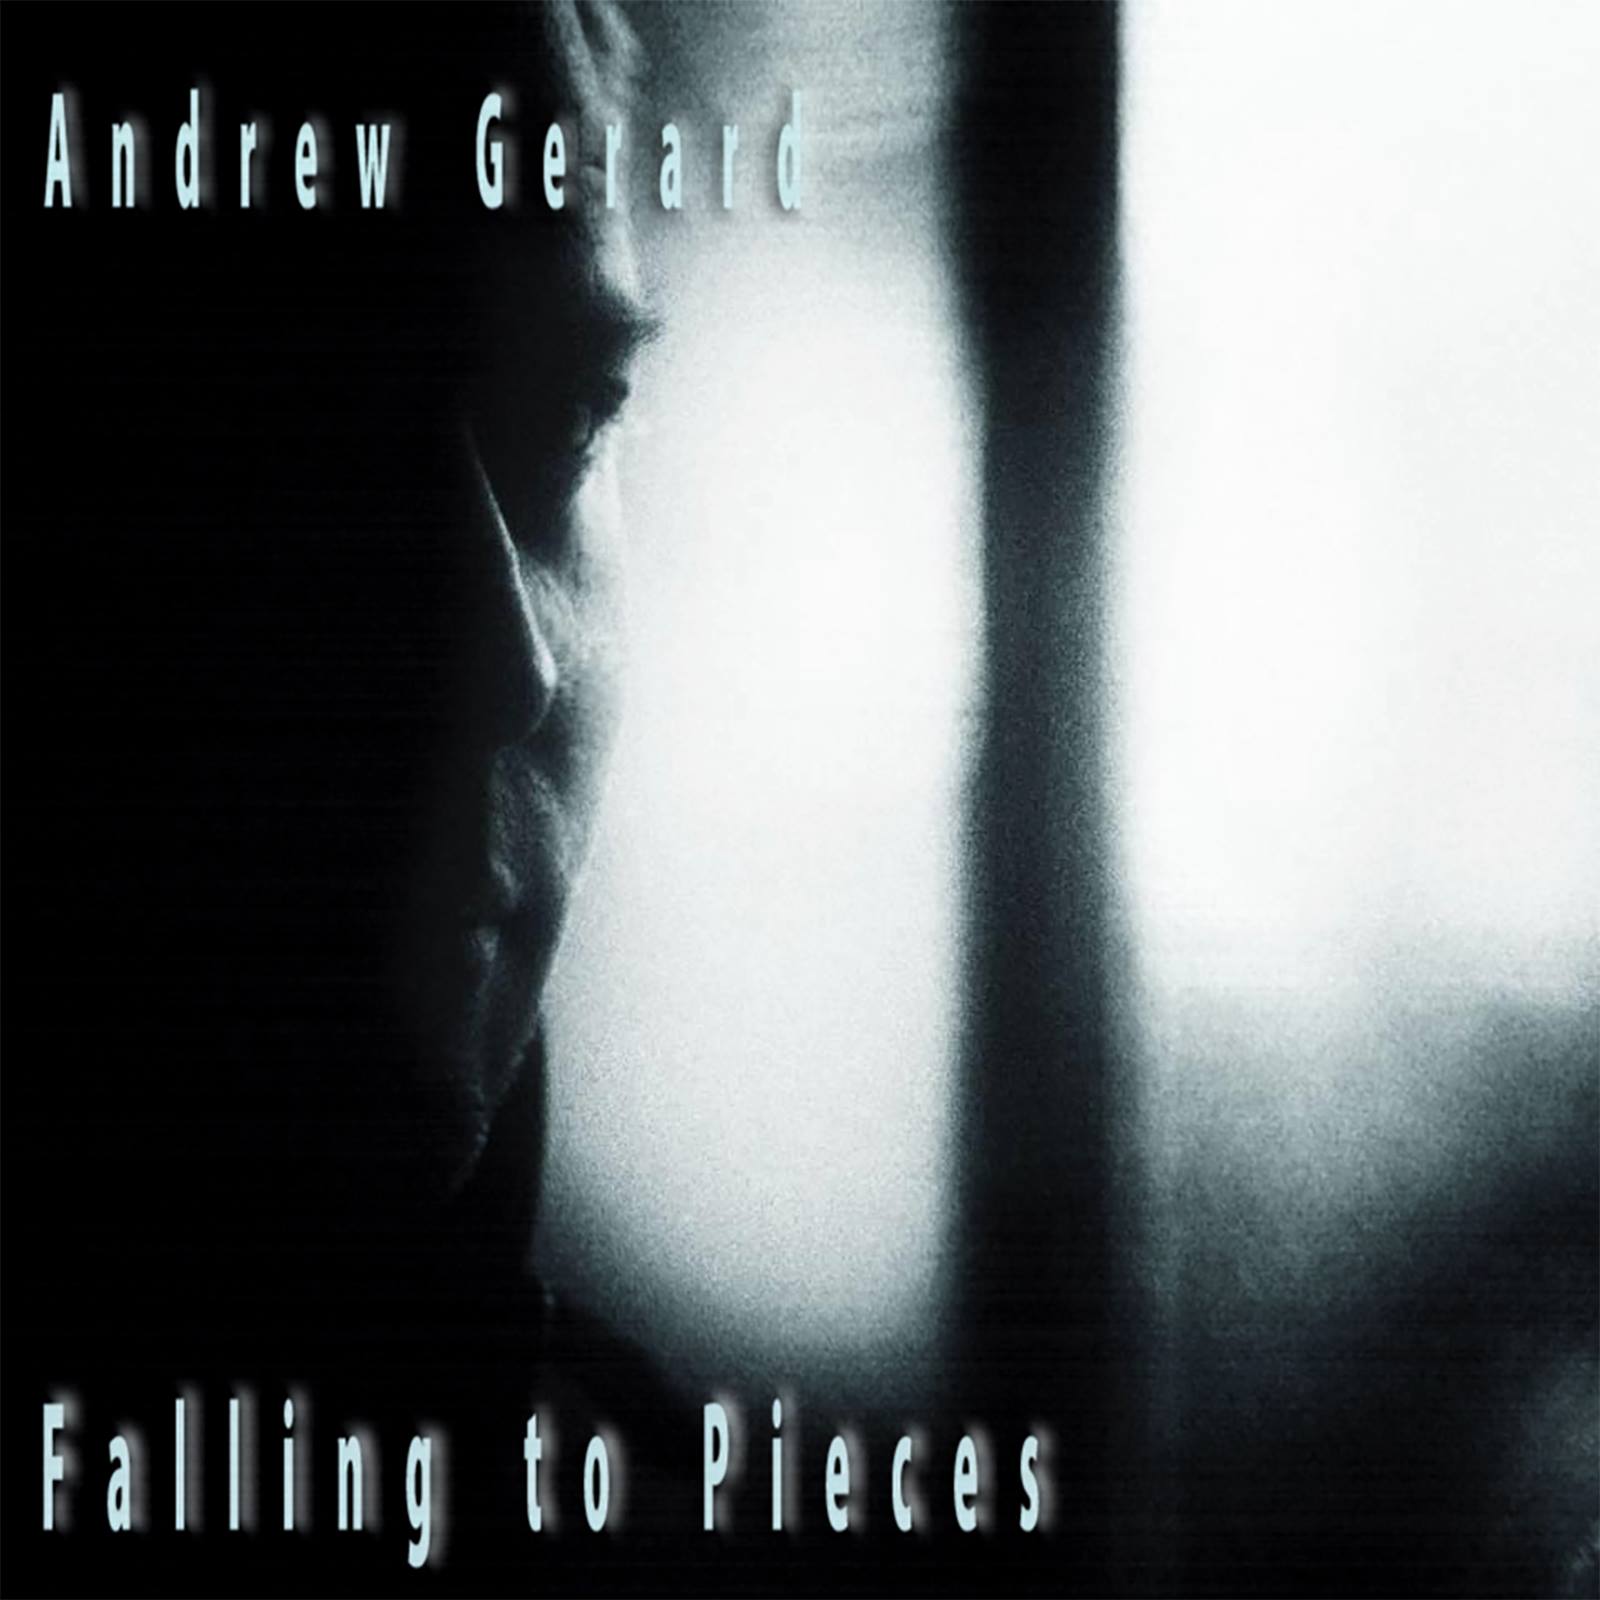  Andrew Gerard – “Falling To Pieces”